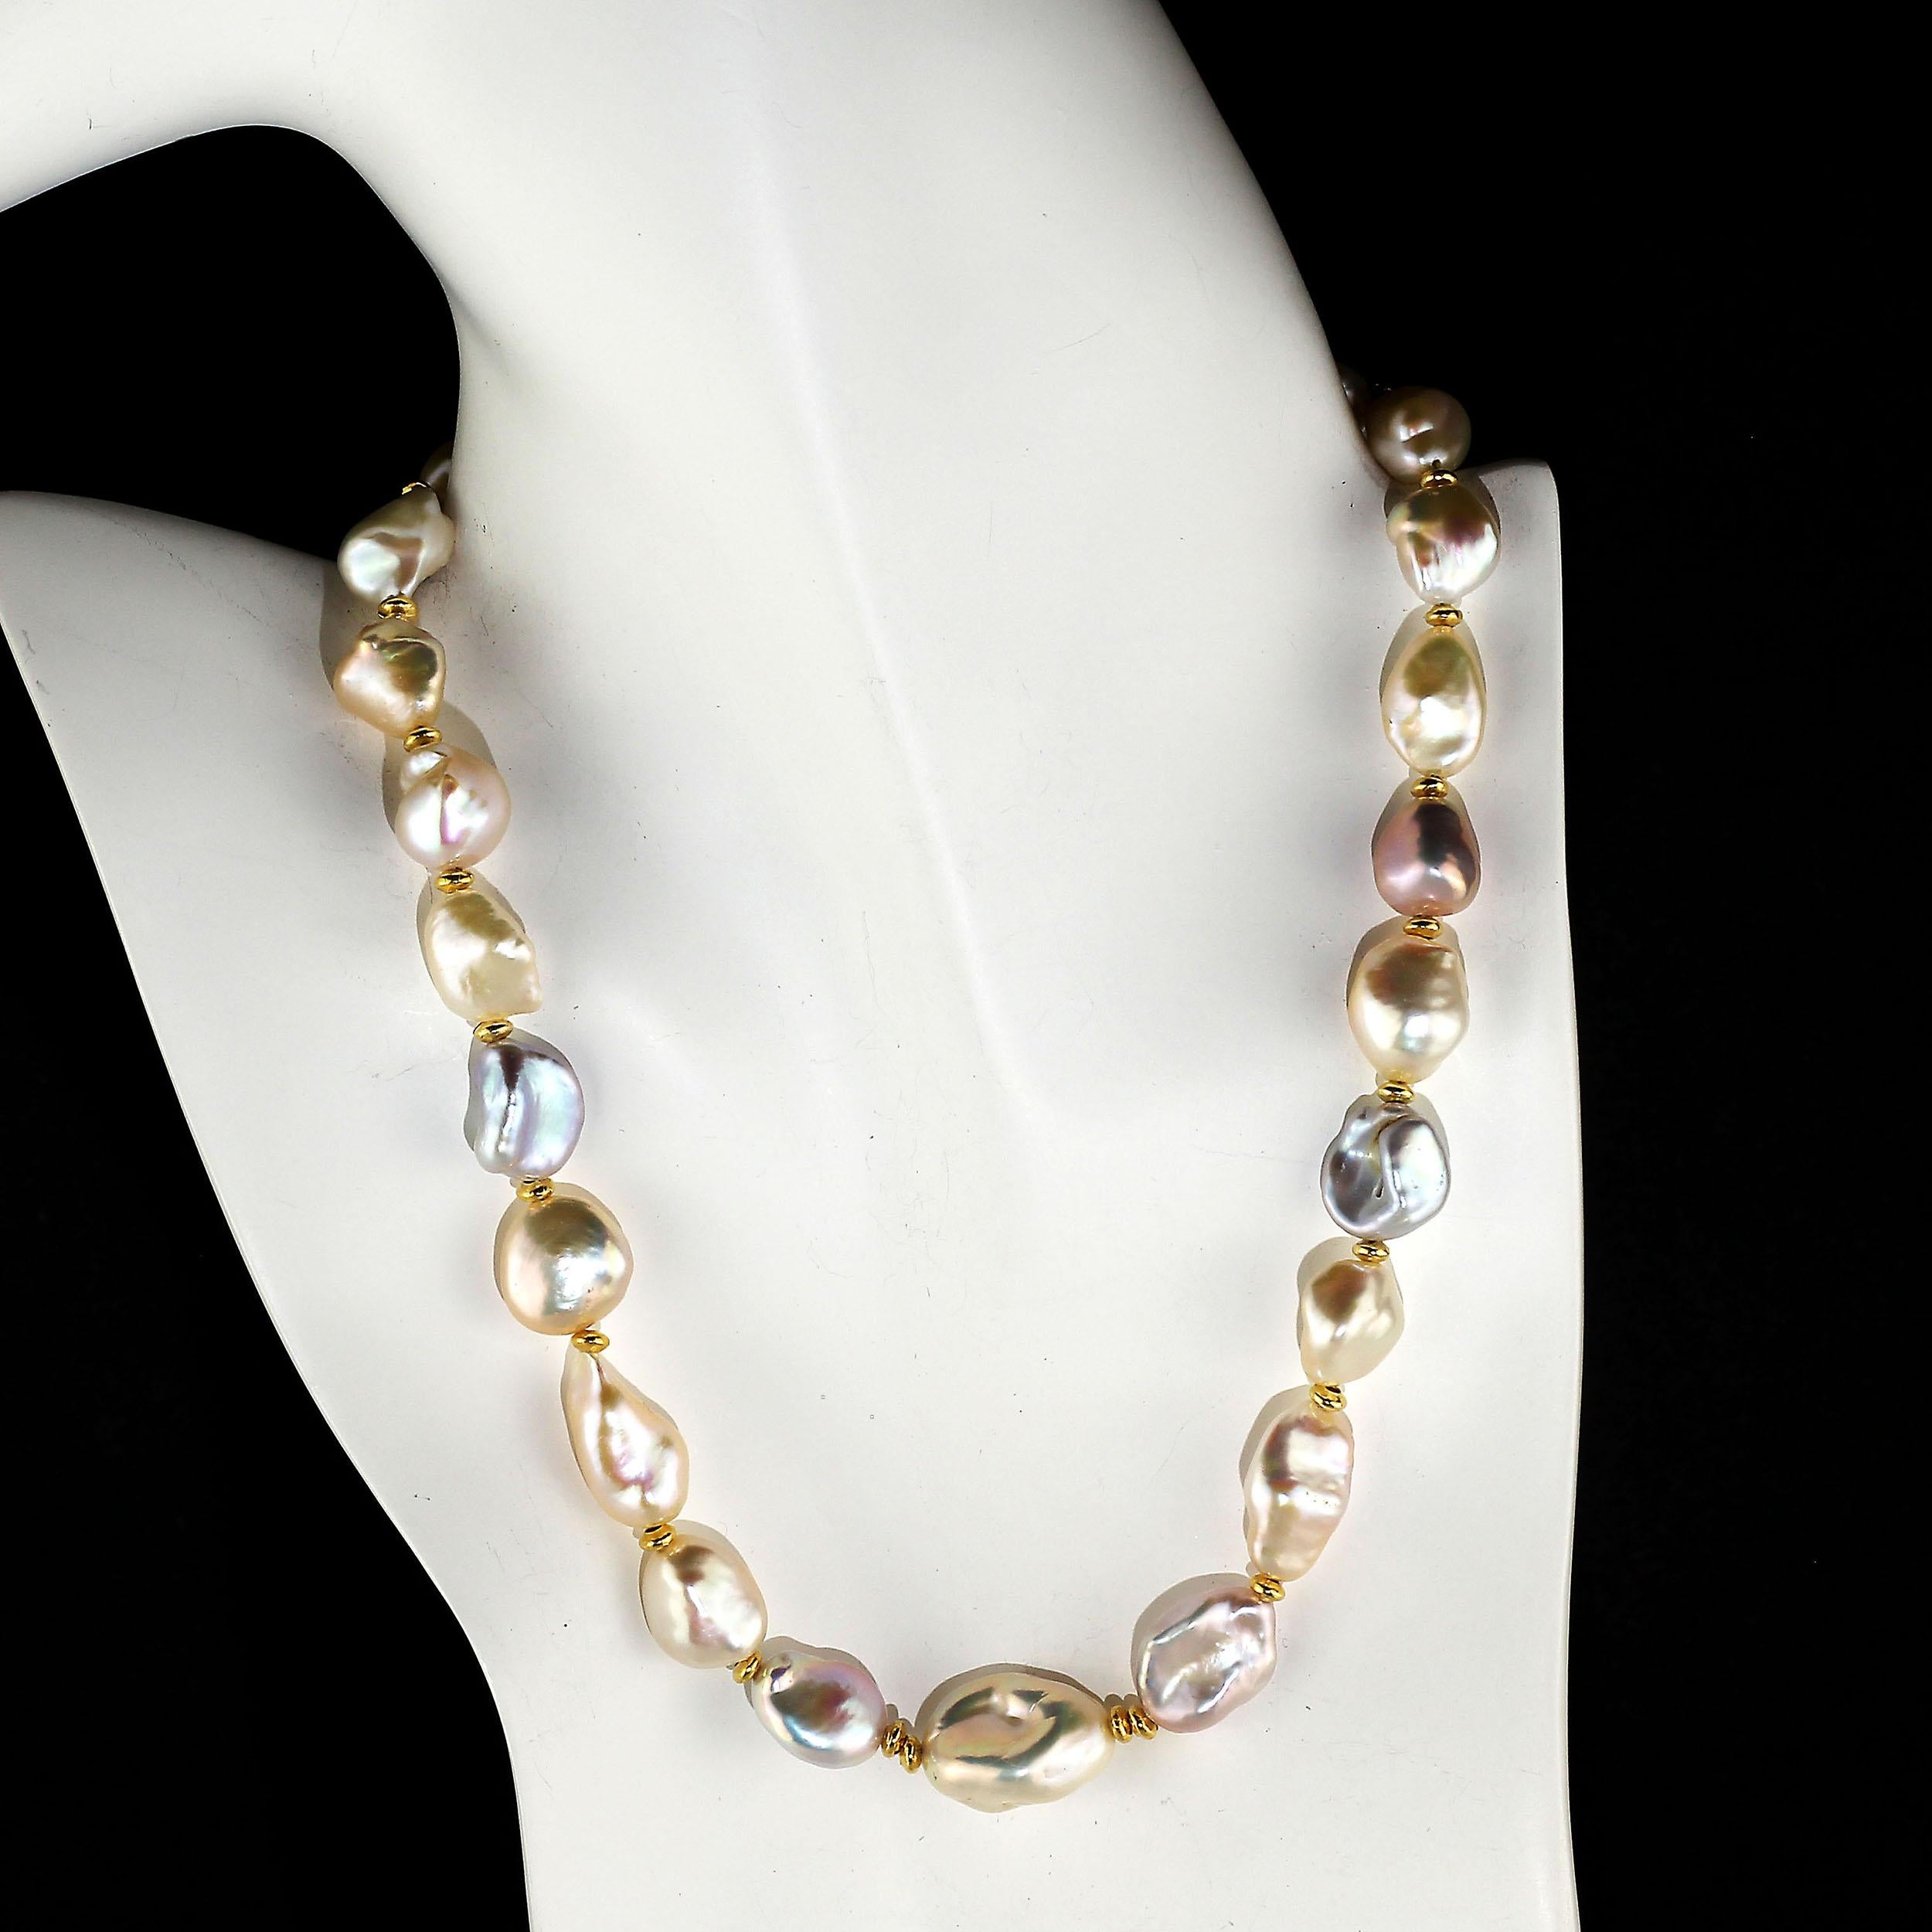 Bead Gorgeous, Glowing, Iridescent Freshwater Pearl Choker Necklace June Birthstone